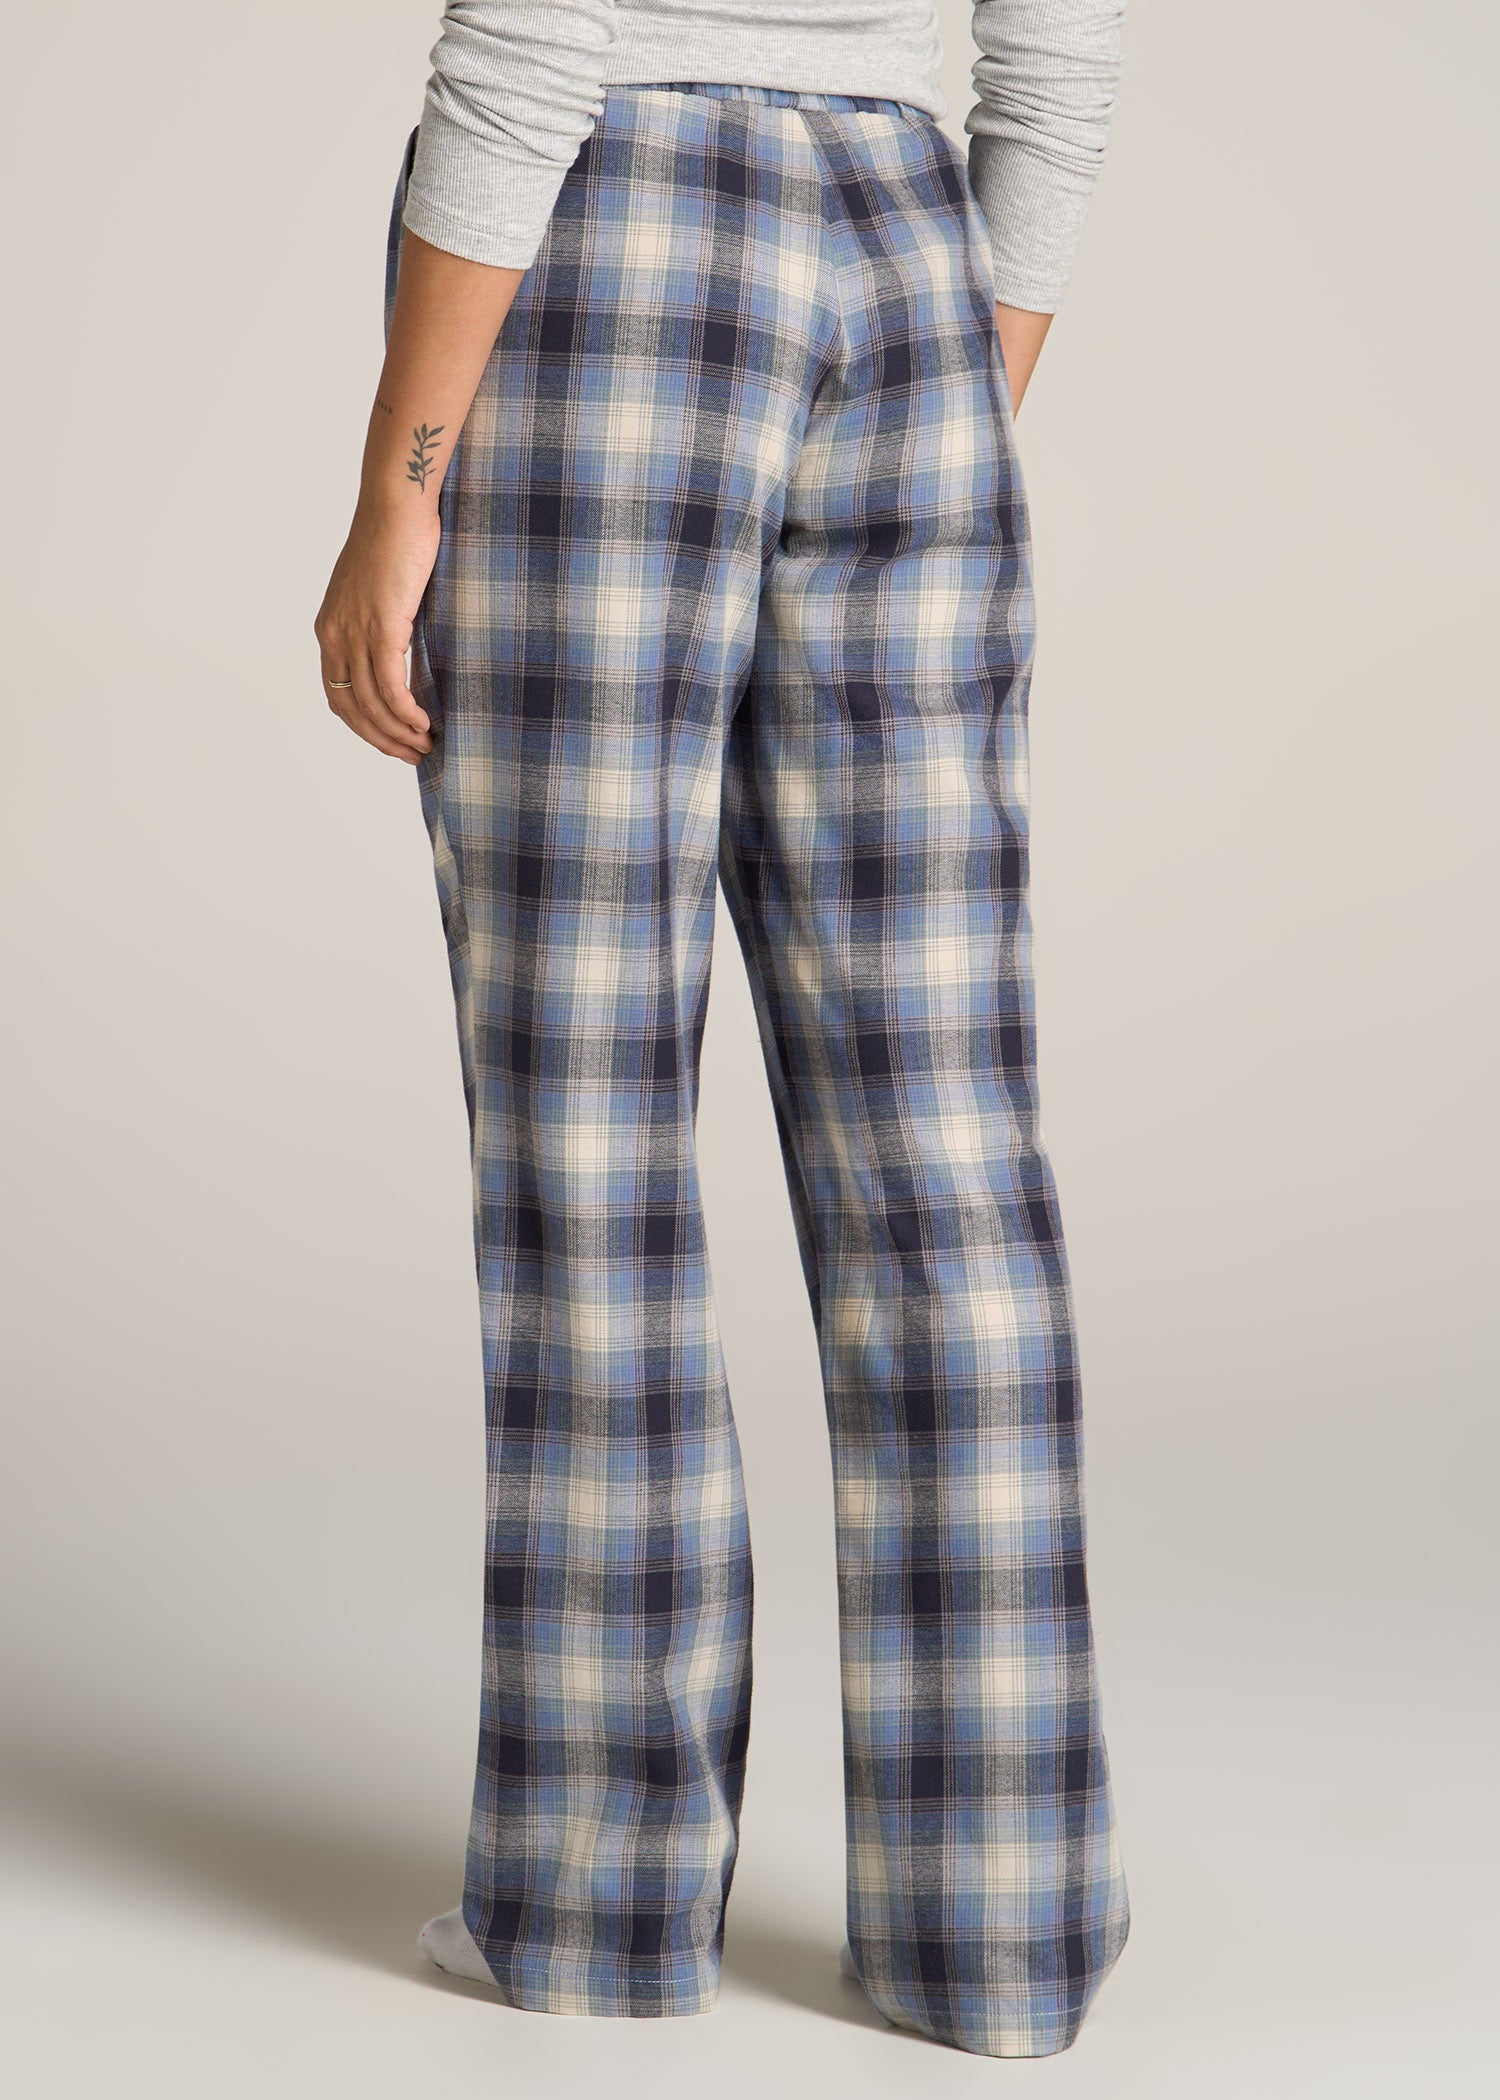 Plaid Pajama Pants for Women High Waist Drawstring Lounge Trousers Fall  Loose Straight Home Pajama Bottoms Yoga Pants at  Women's Clothing  store